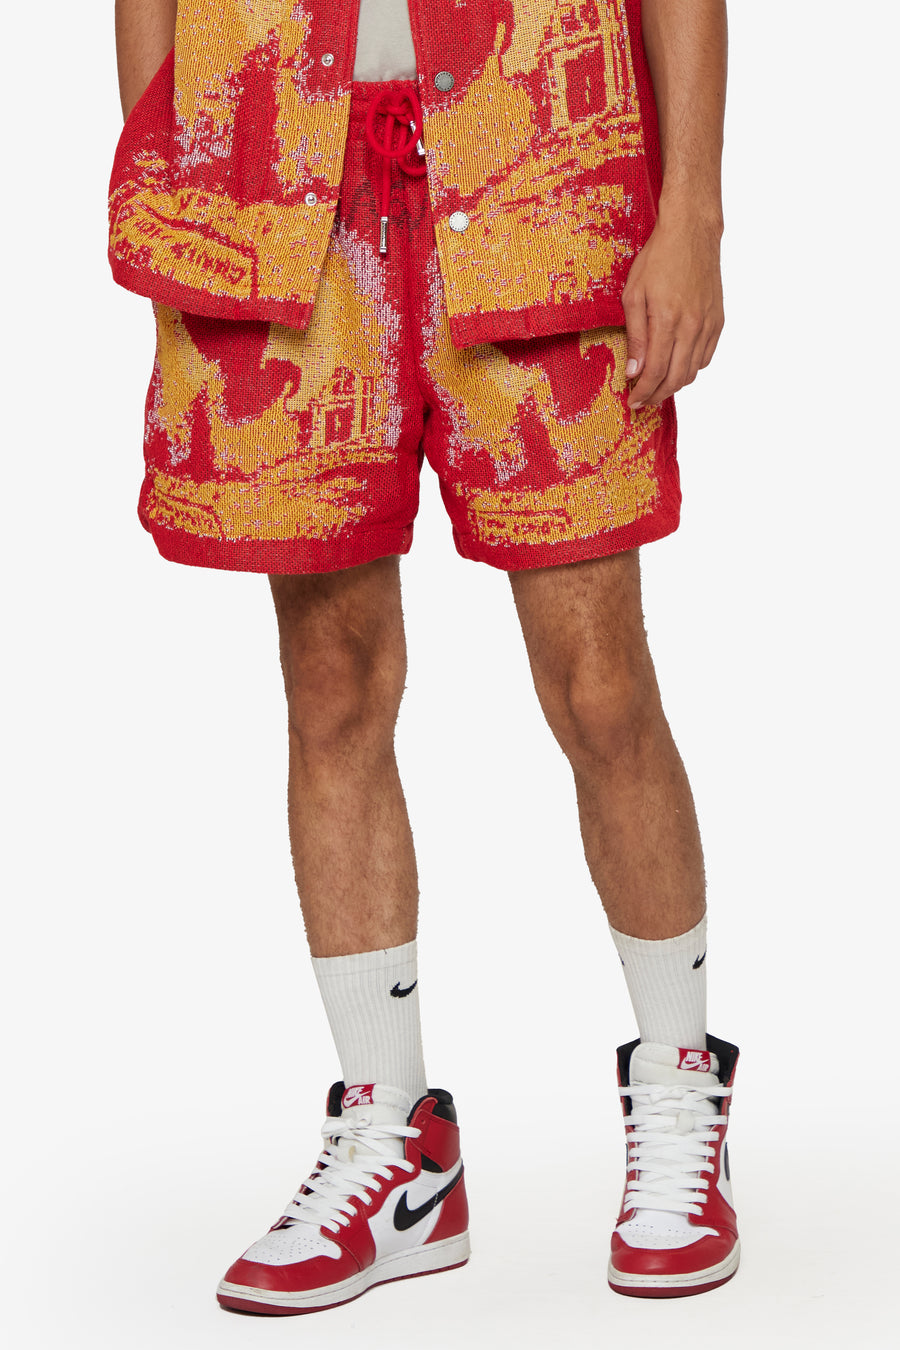 "GHOST HANDS" RED TAPESTRY SHORTS